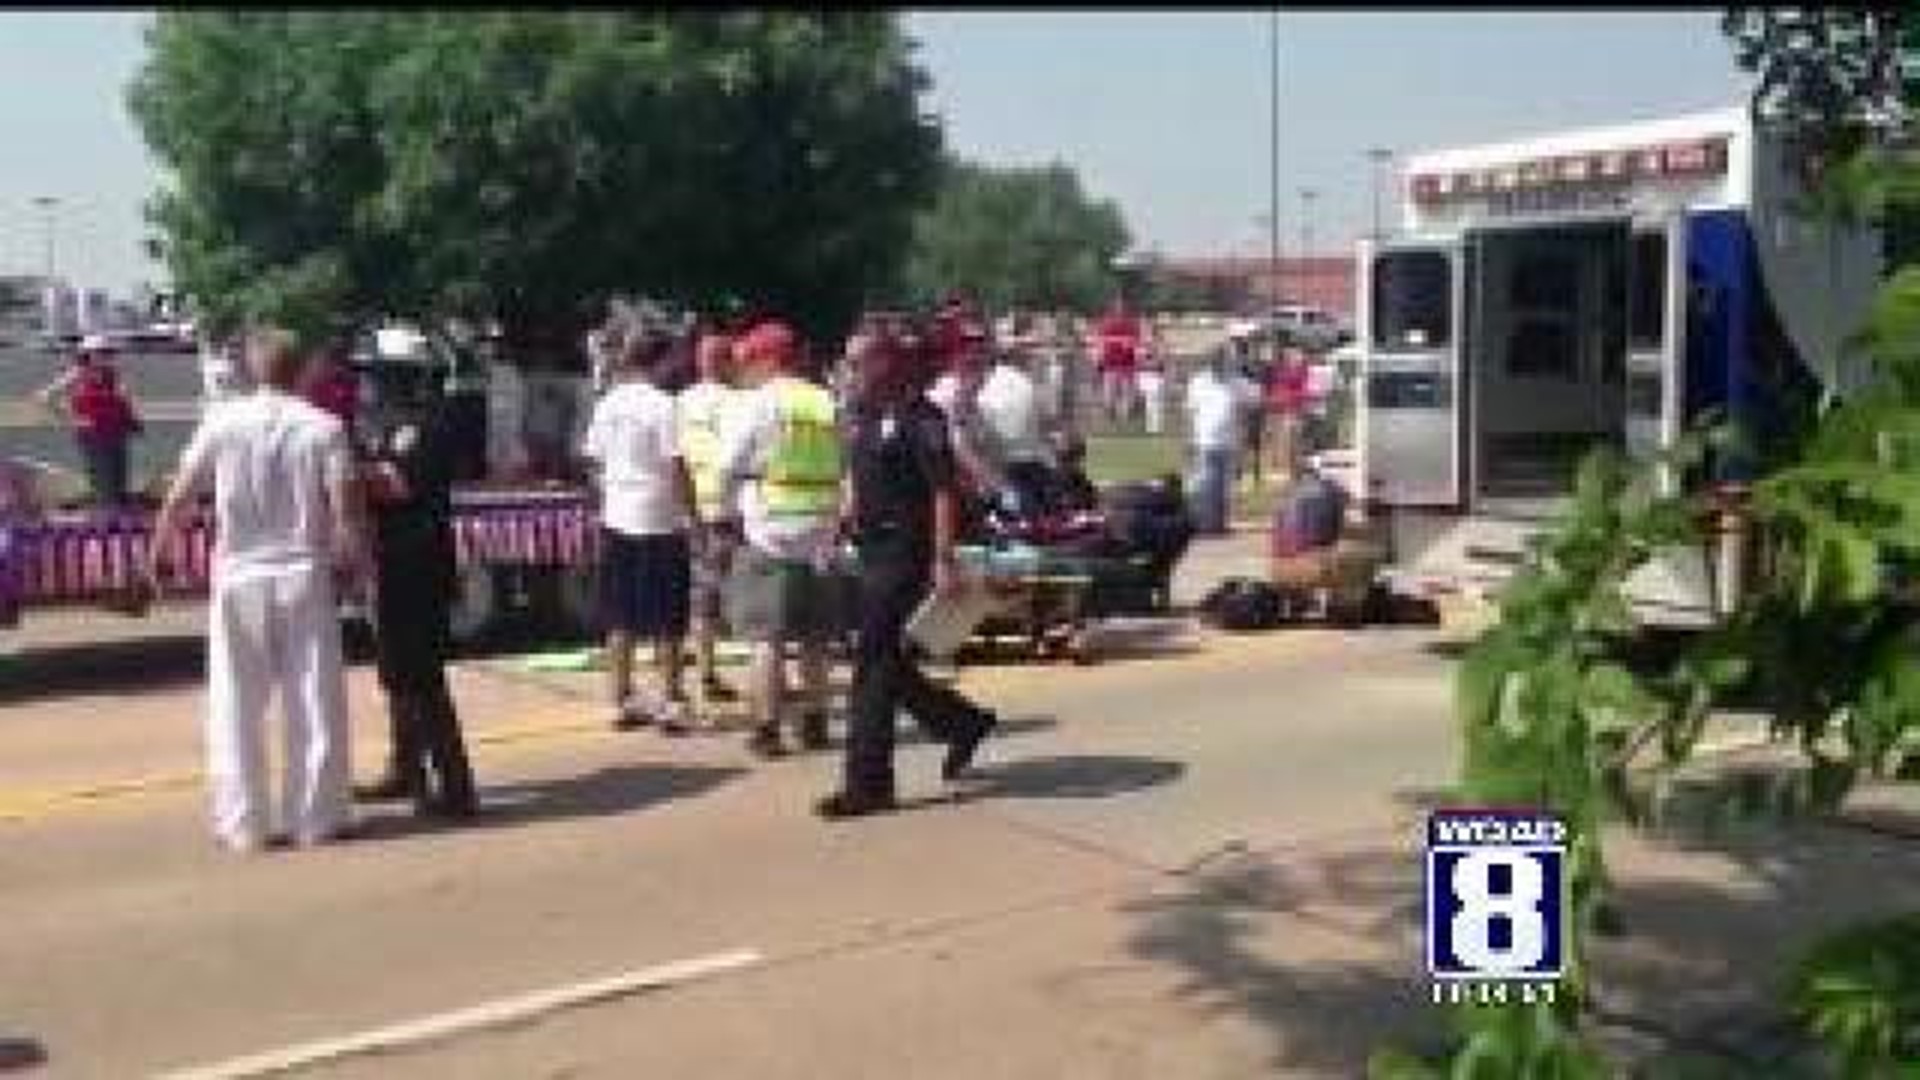 Fatal accident at Oklahoma Fourth of July parade